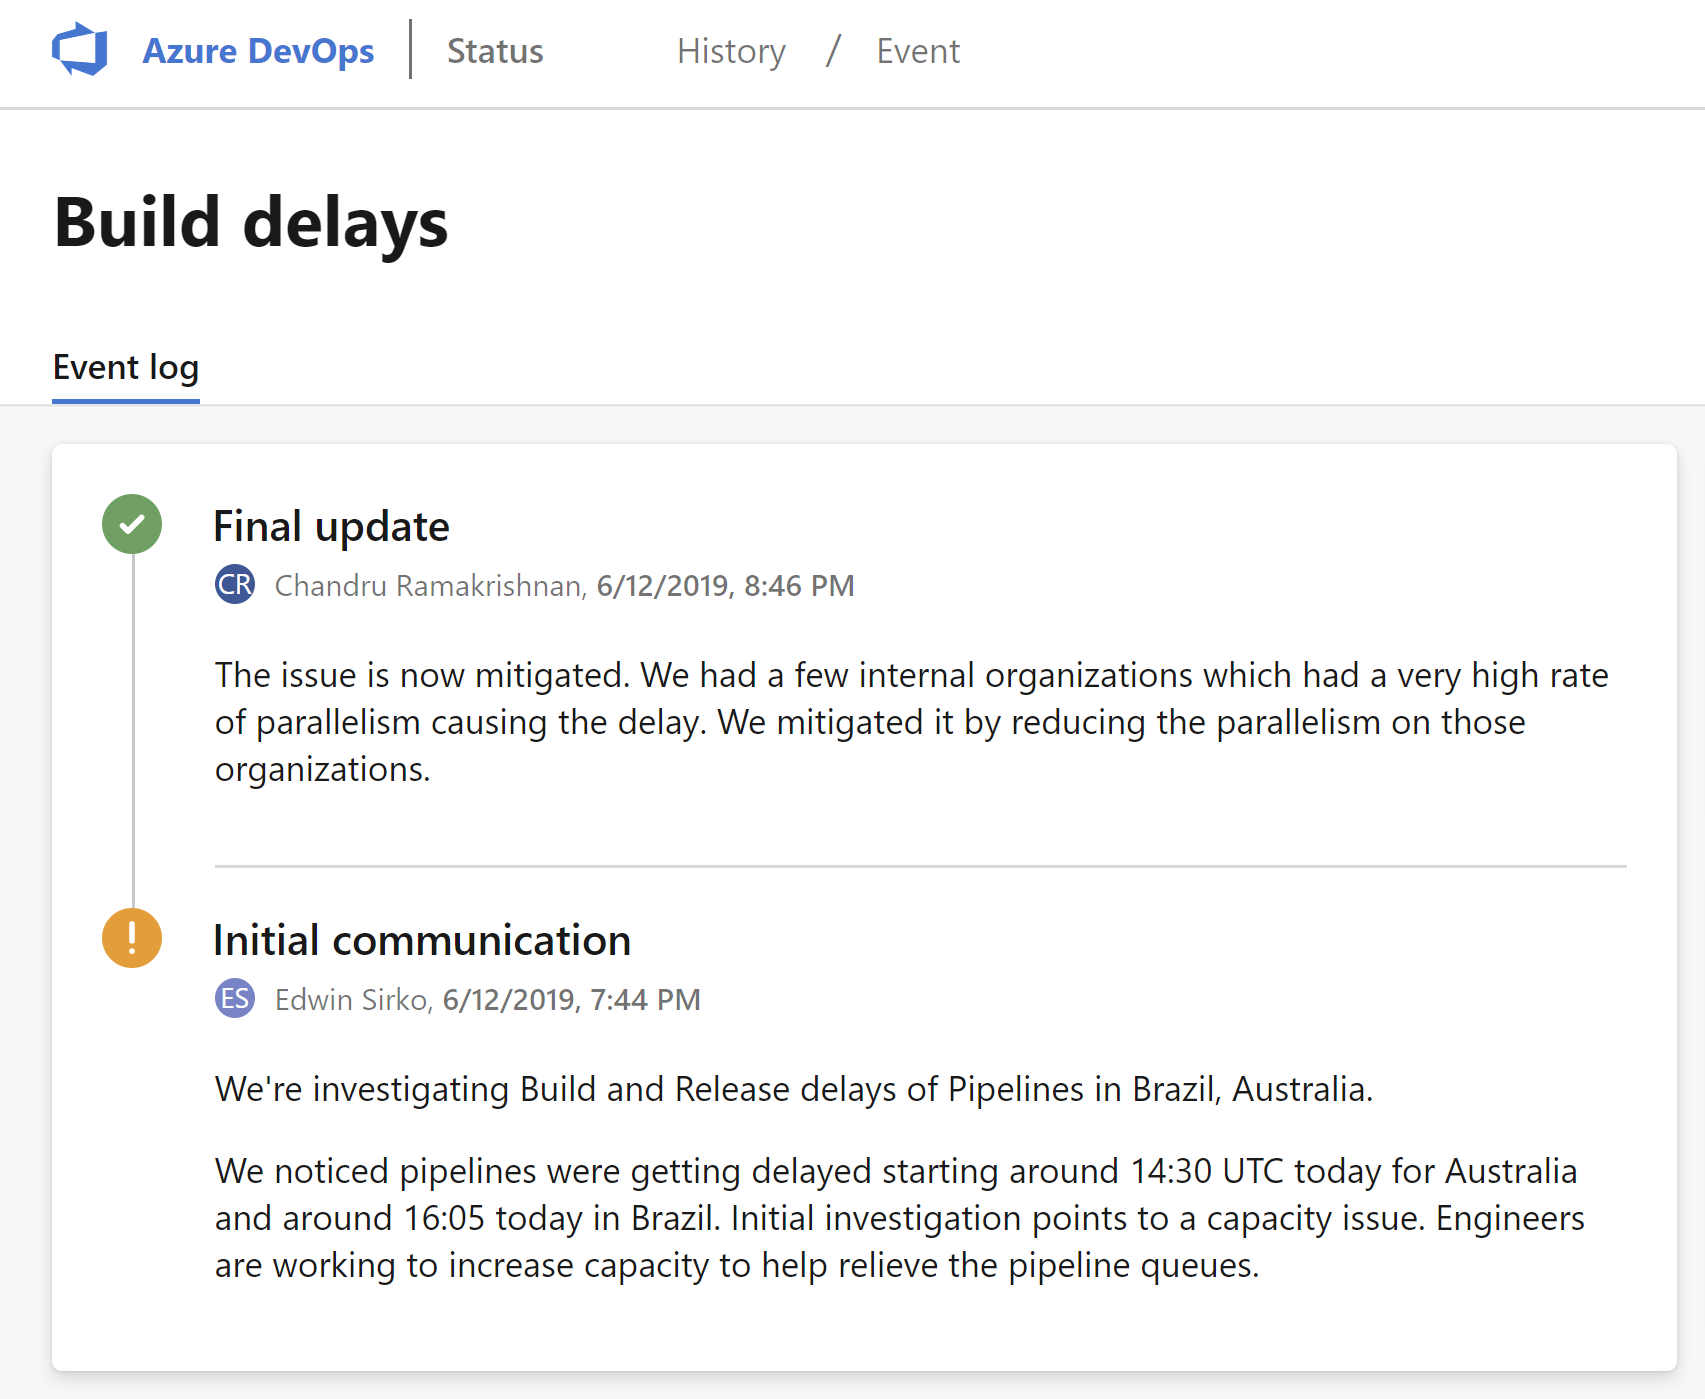 Azure DevOps outage in Brazil and Australia